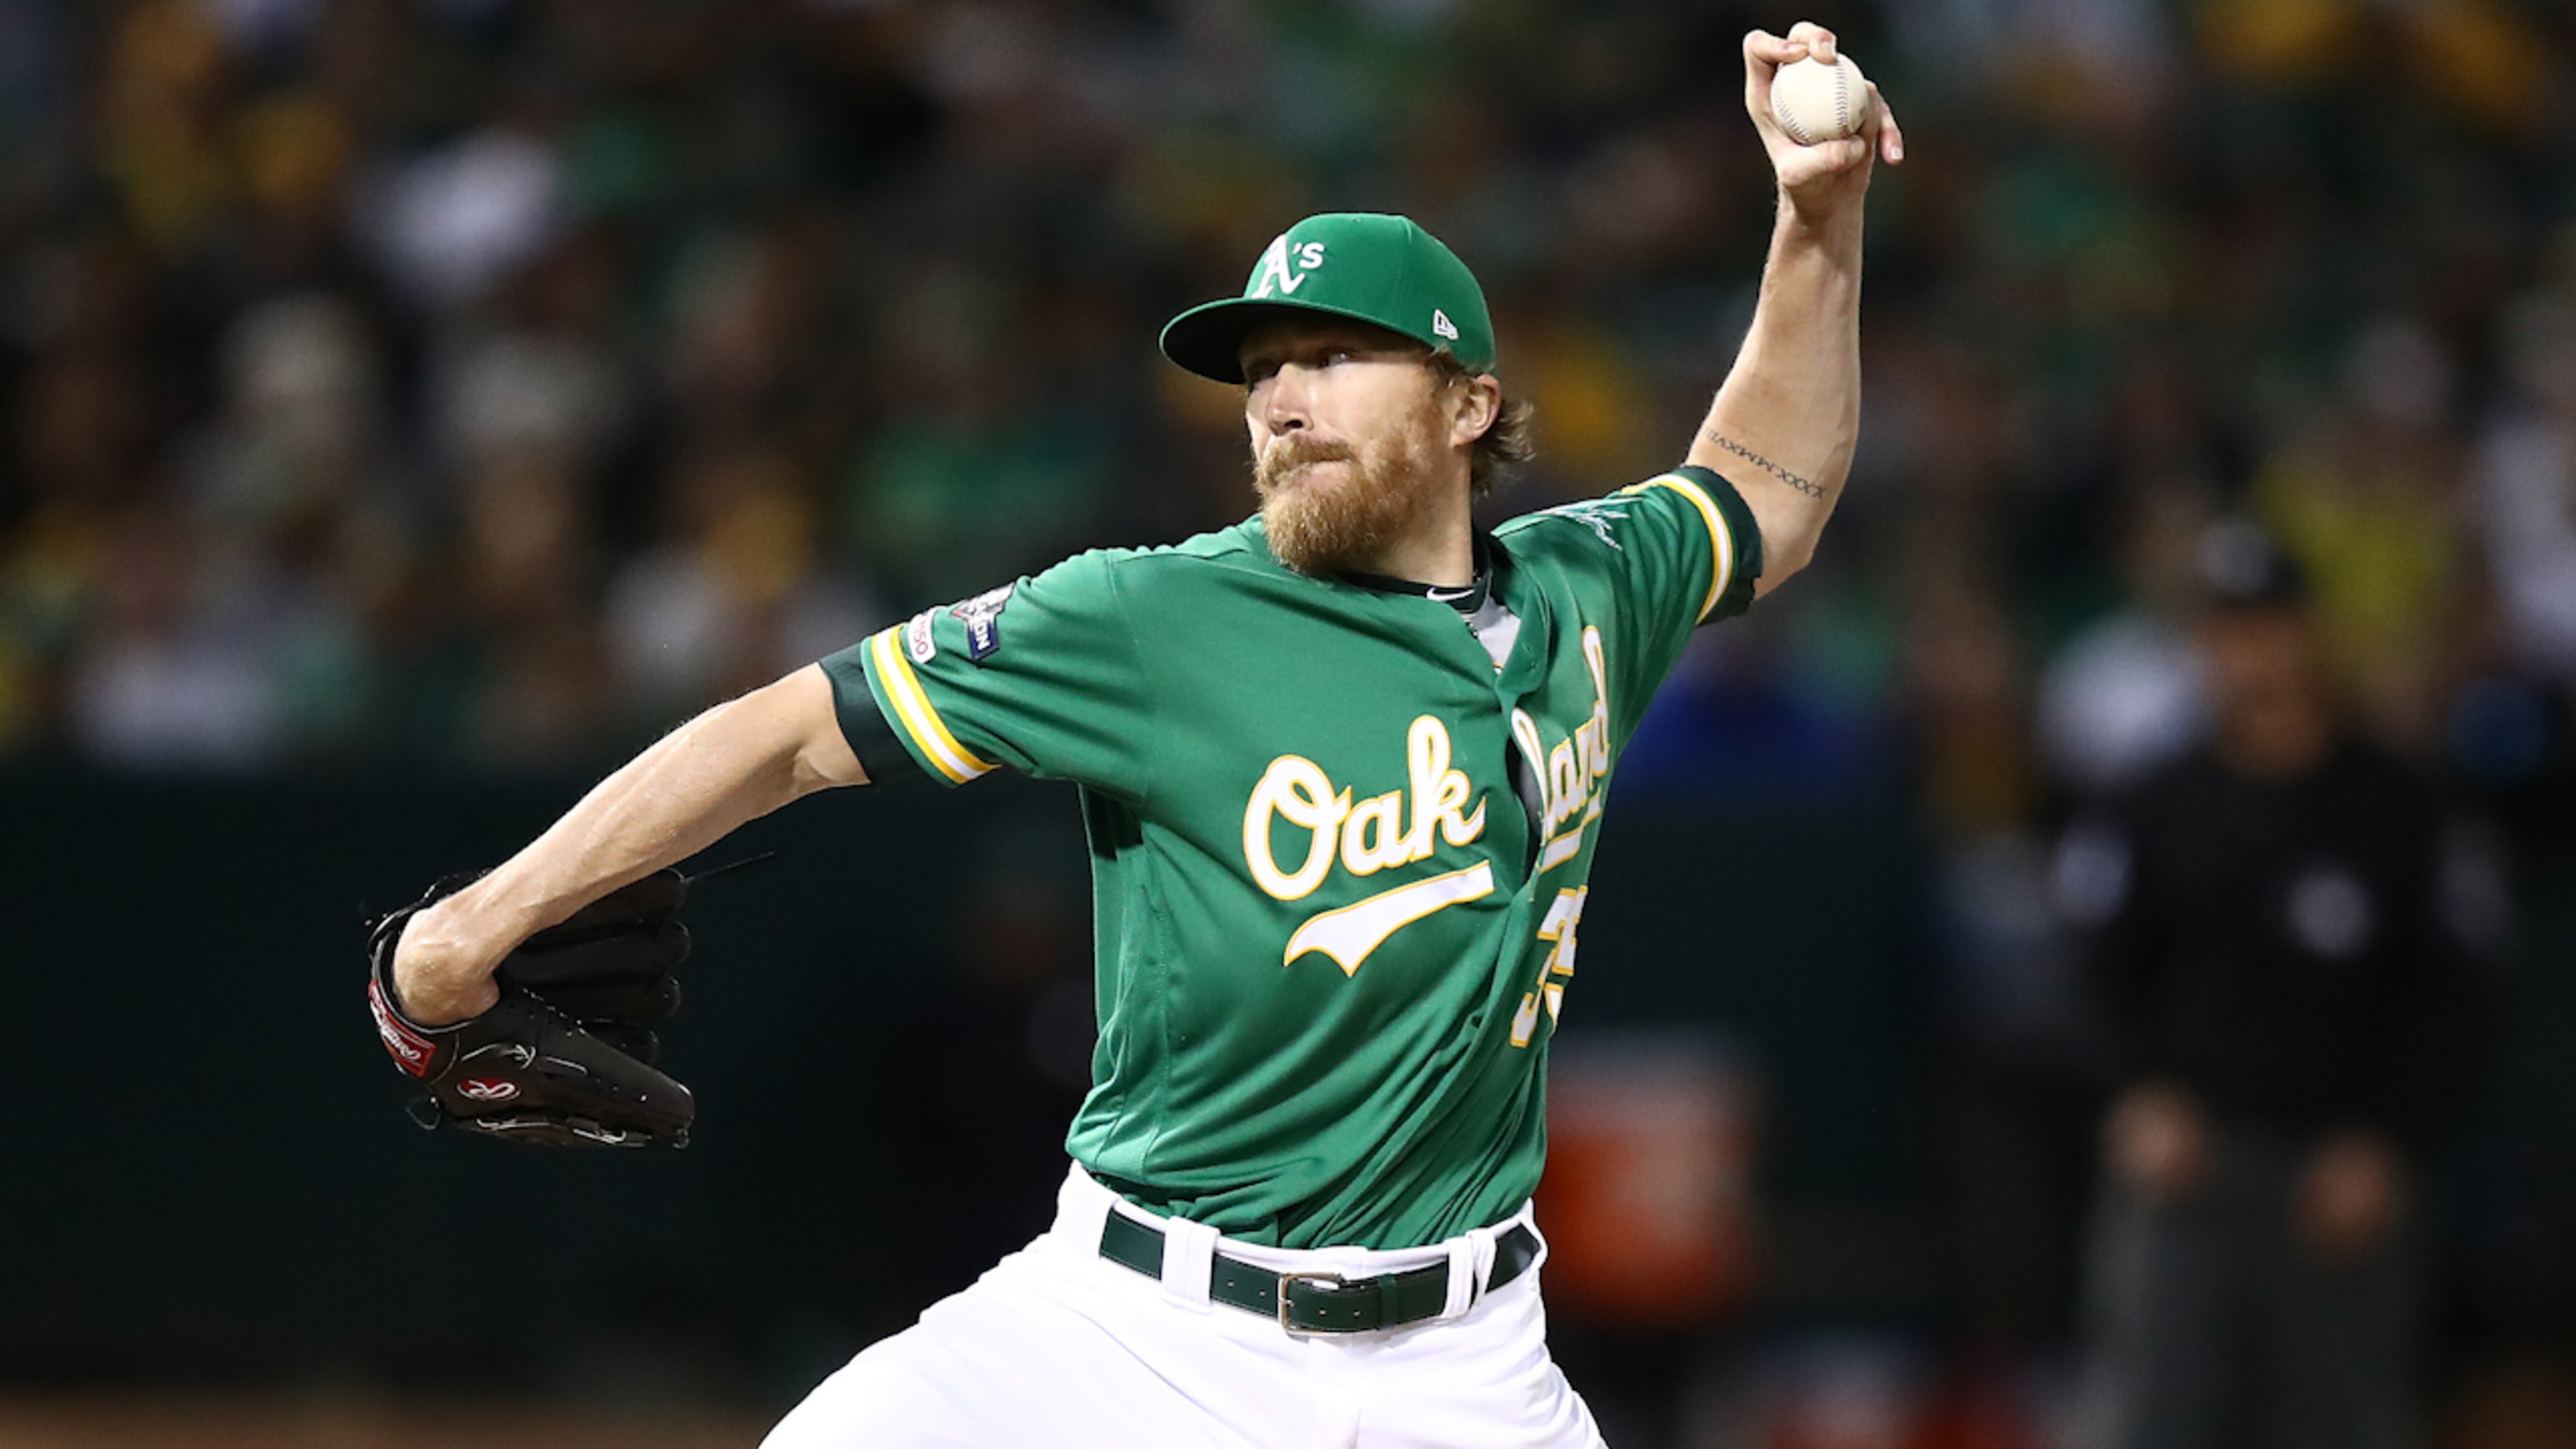 A's at-risk pitcher Jake Diekman details decision on whether to play in 2020